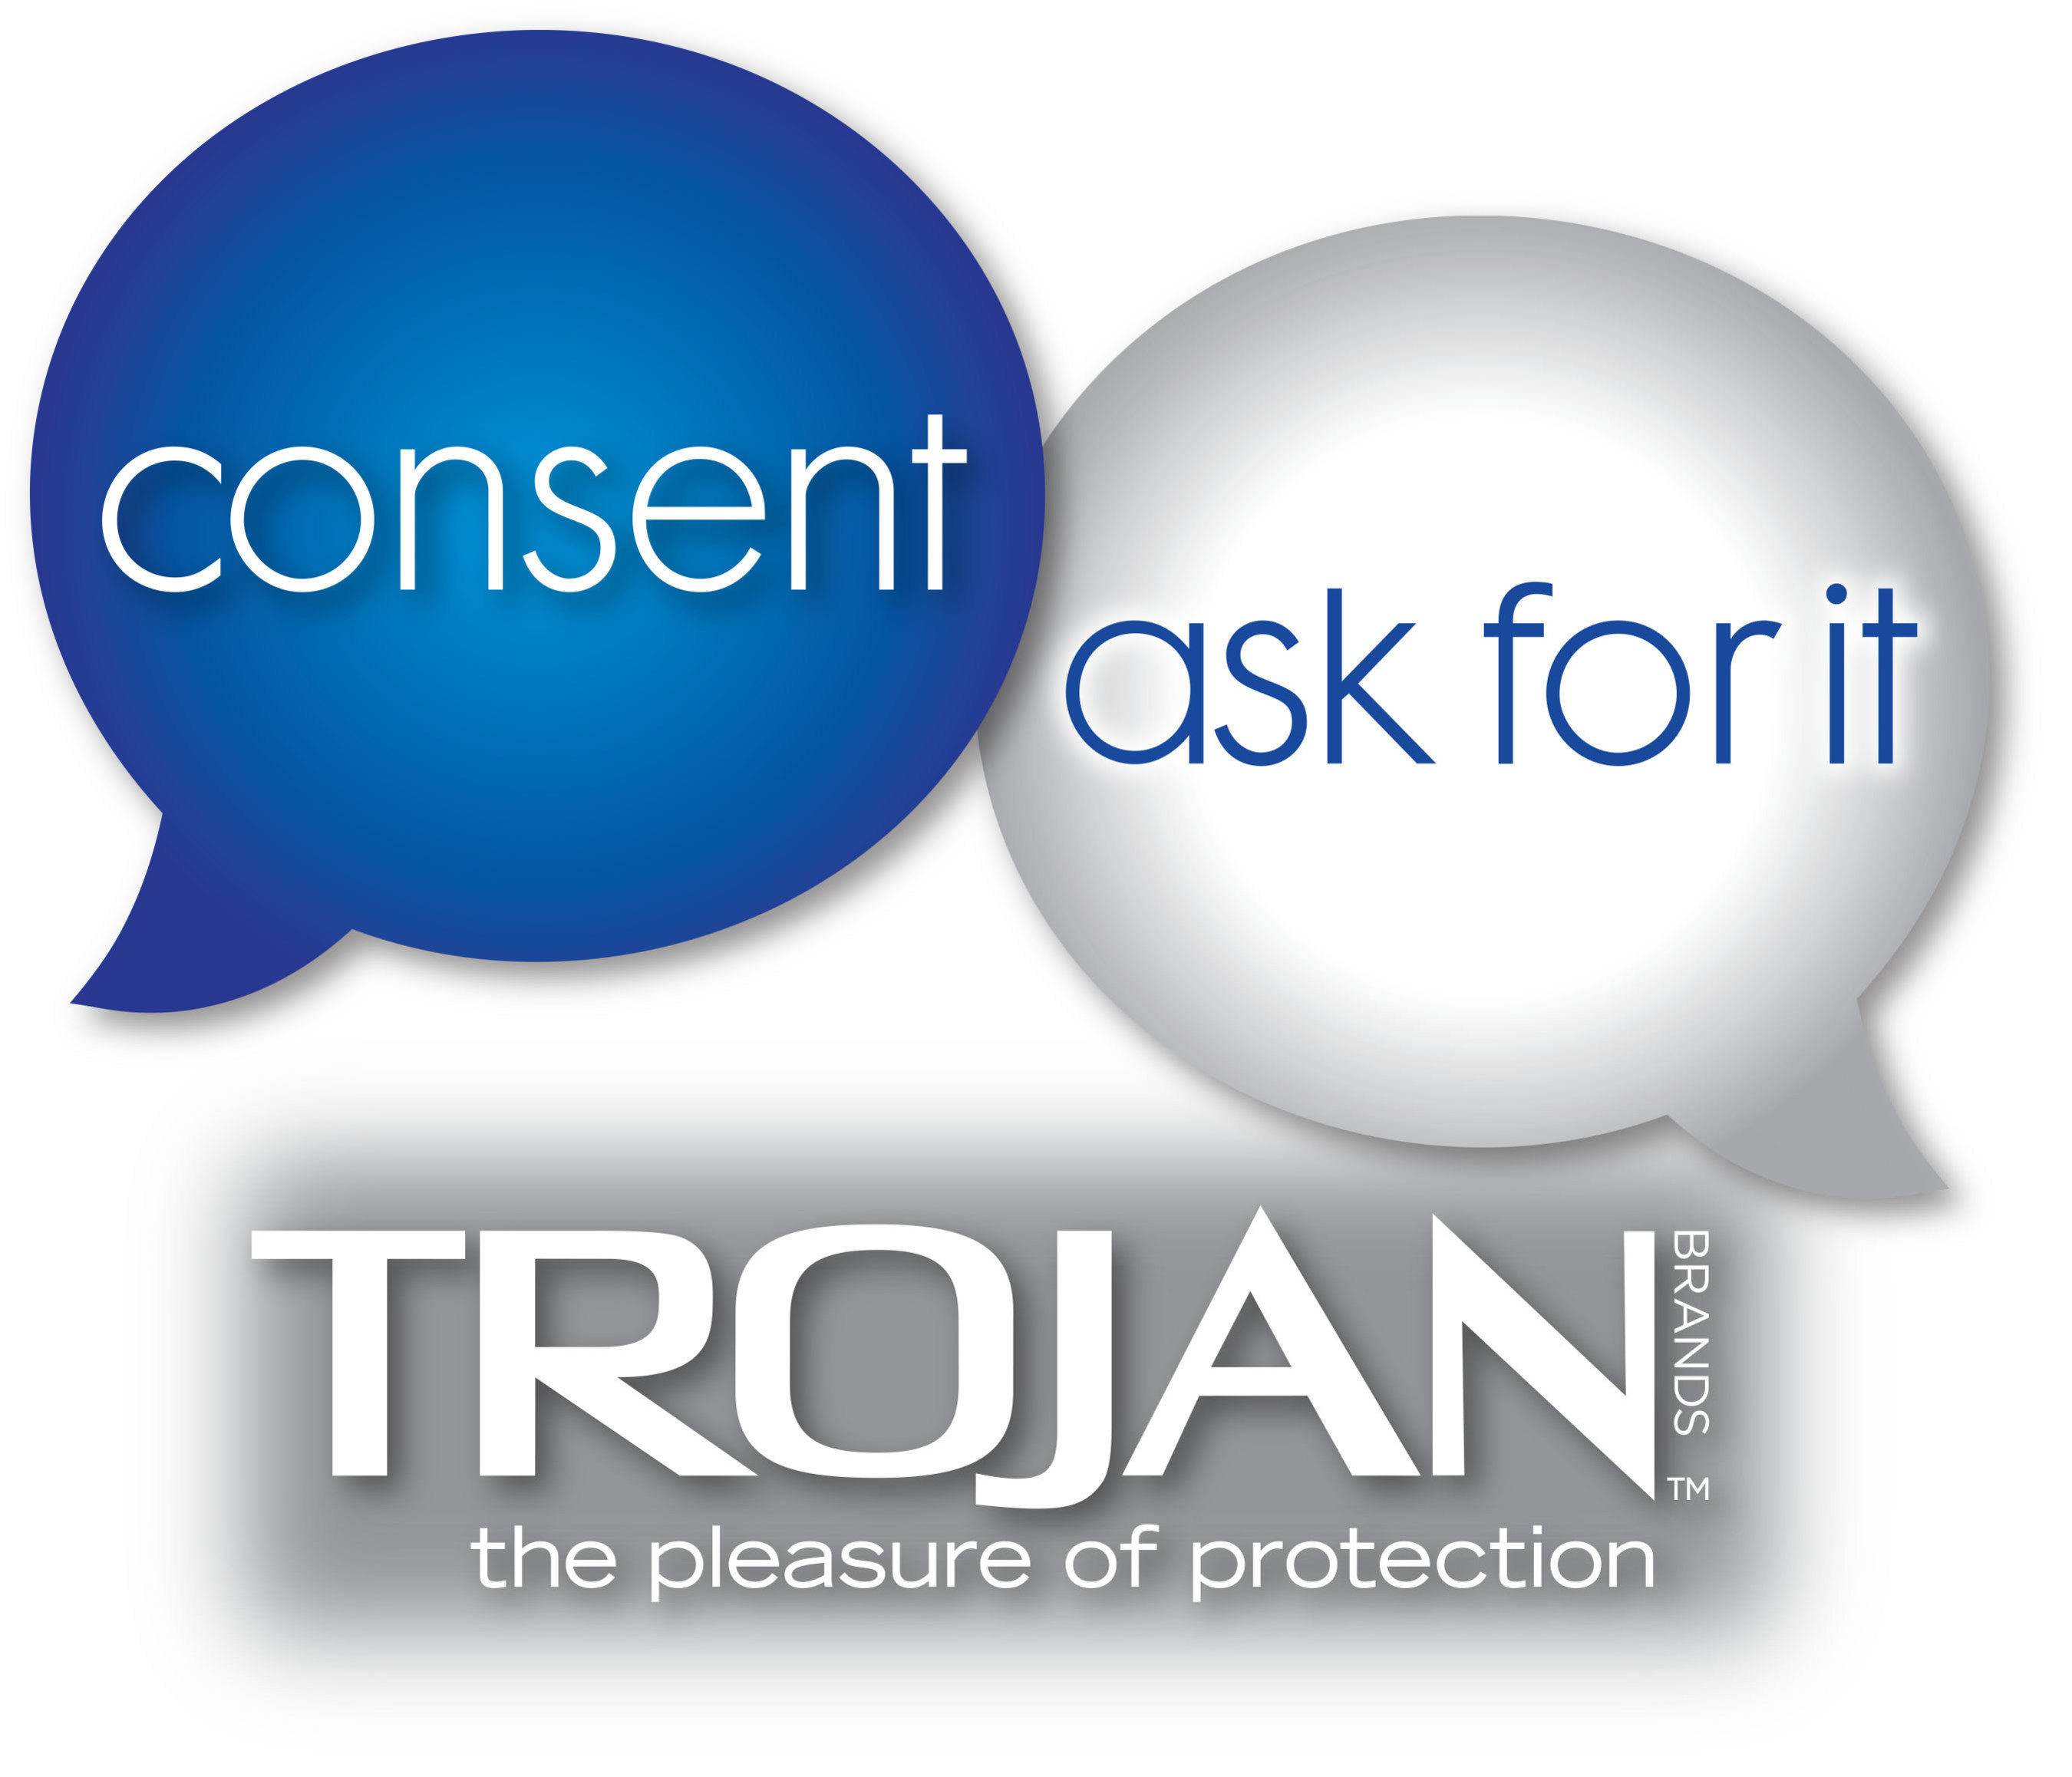 Trojan(TM) and YouTube Vlogger Laci Green Invite Students to Take the Pledge to Support a Culture of Consent on Campus